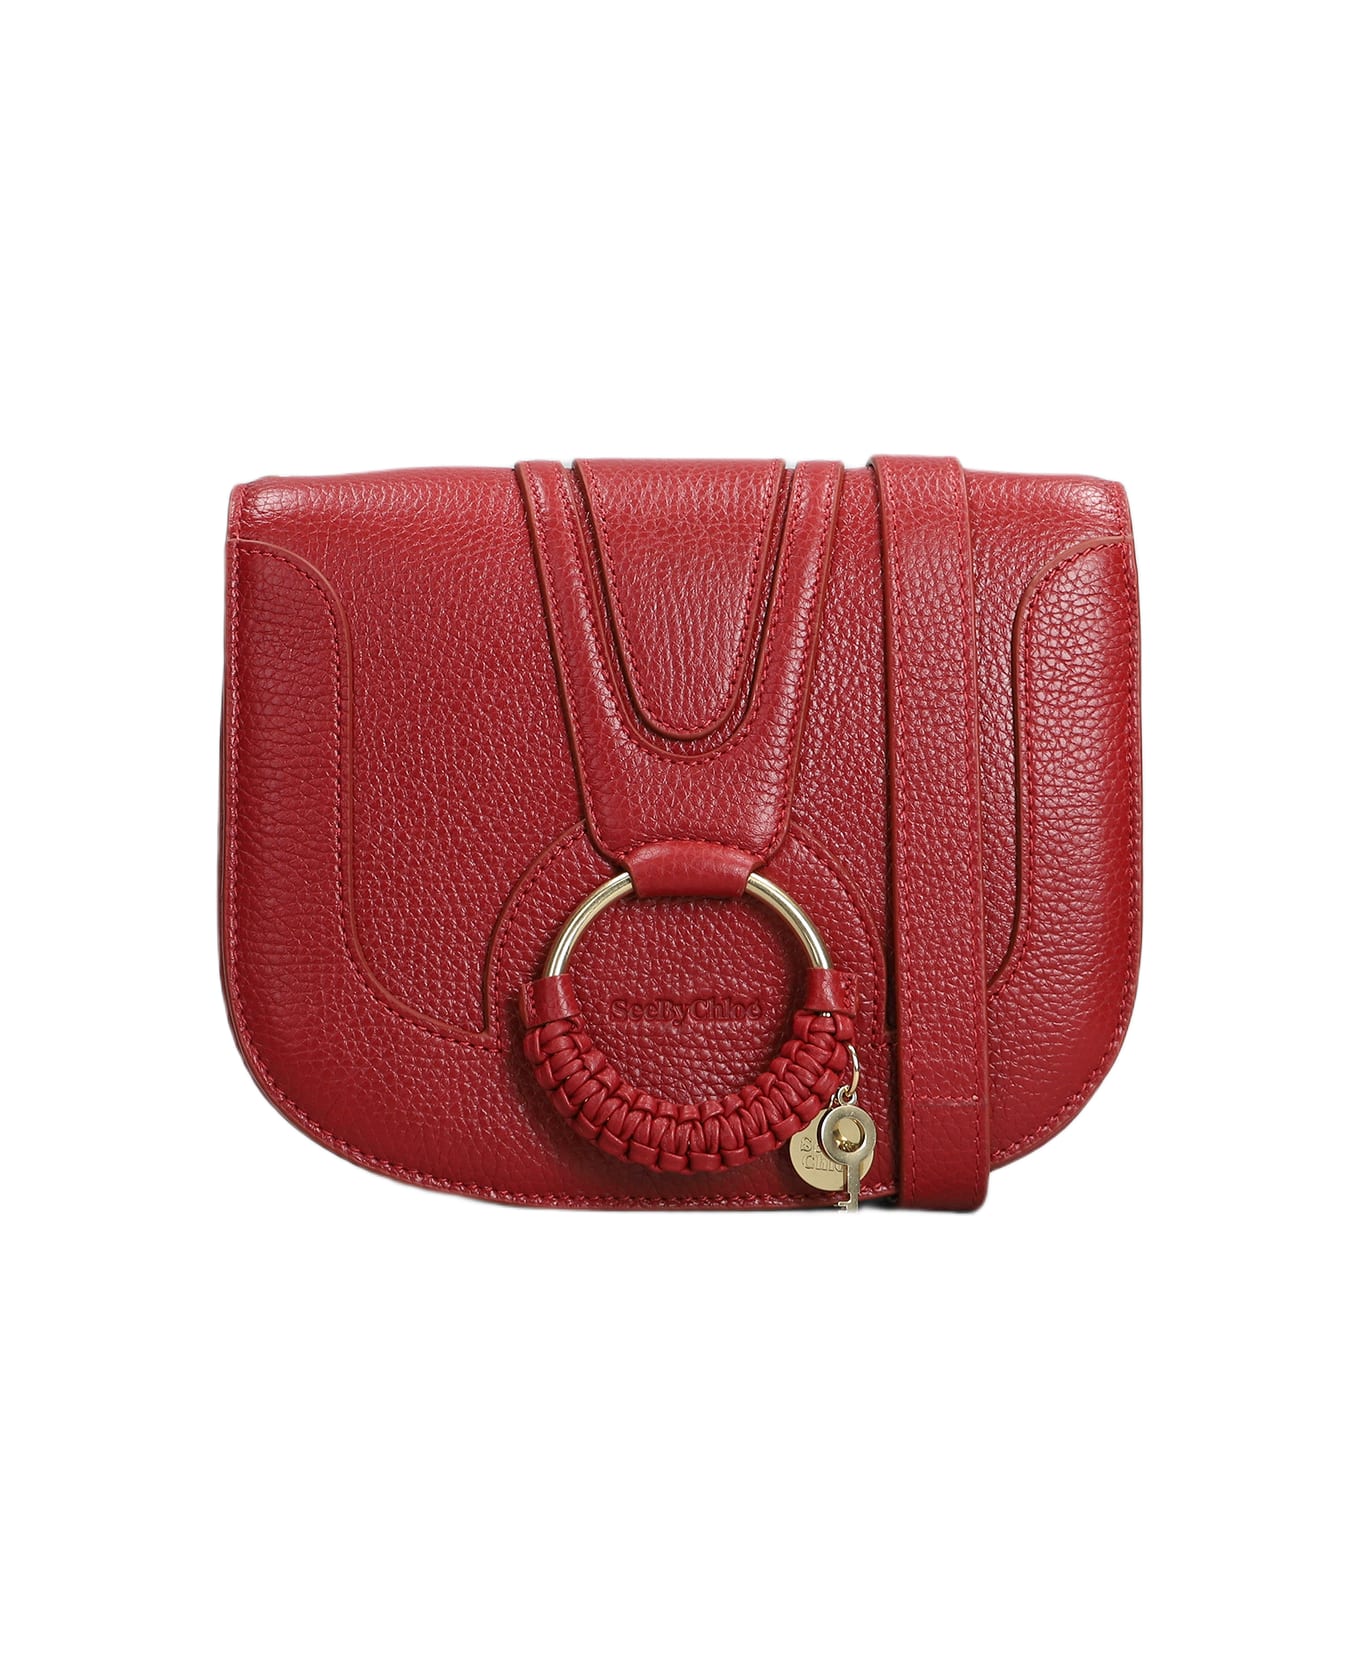 See by Chloé Hana Shoulder Bag In Red Leather - red